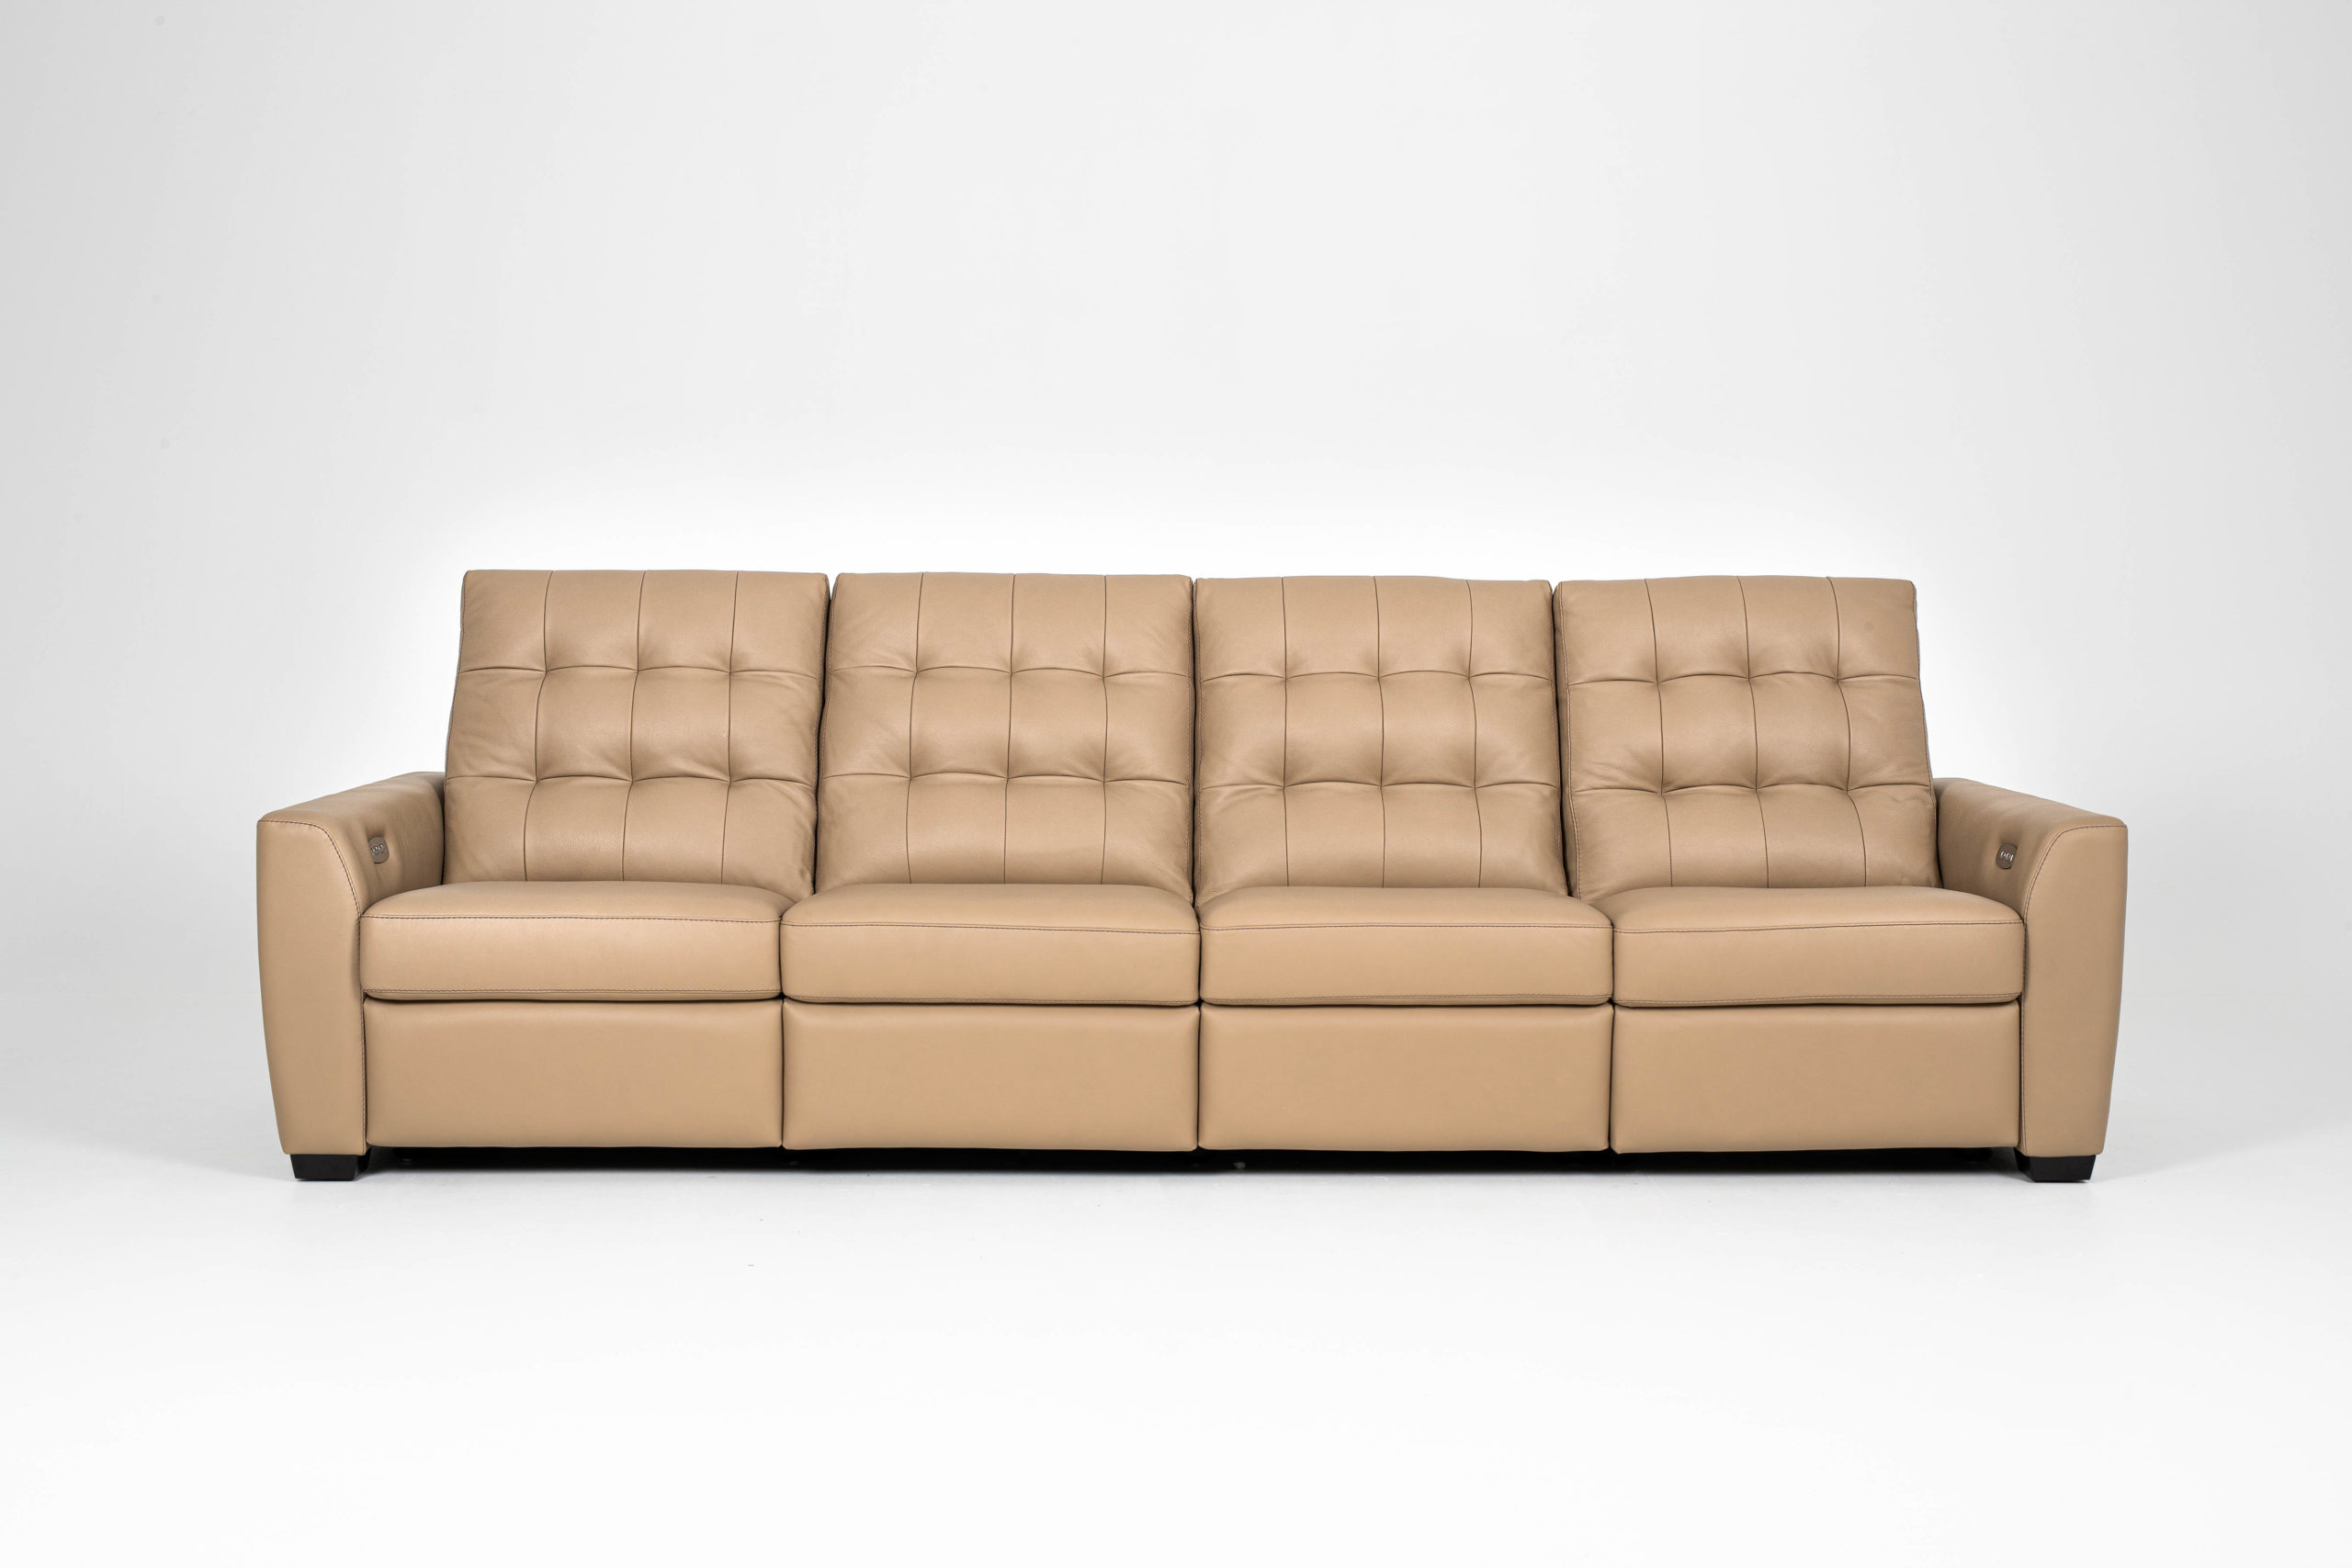 4 person leather reclining sofa